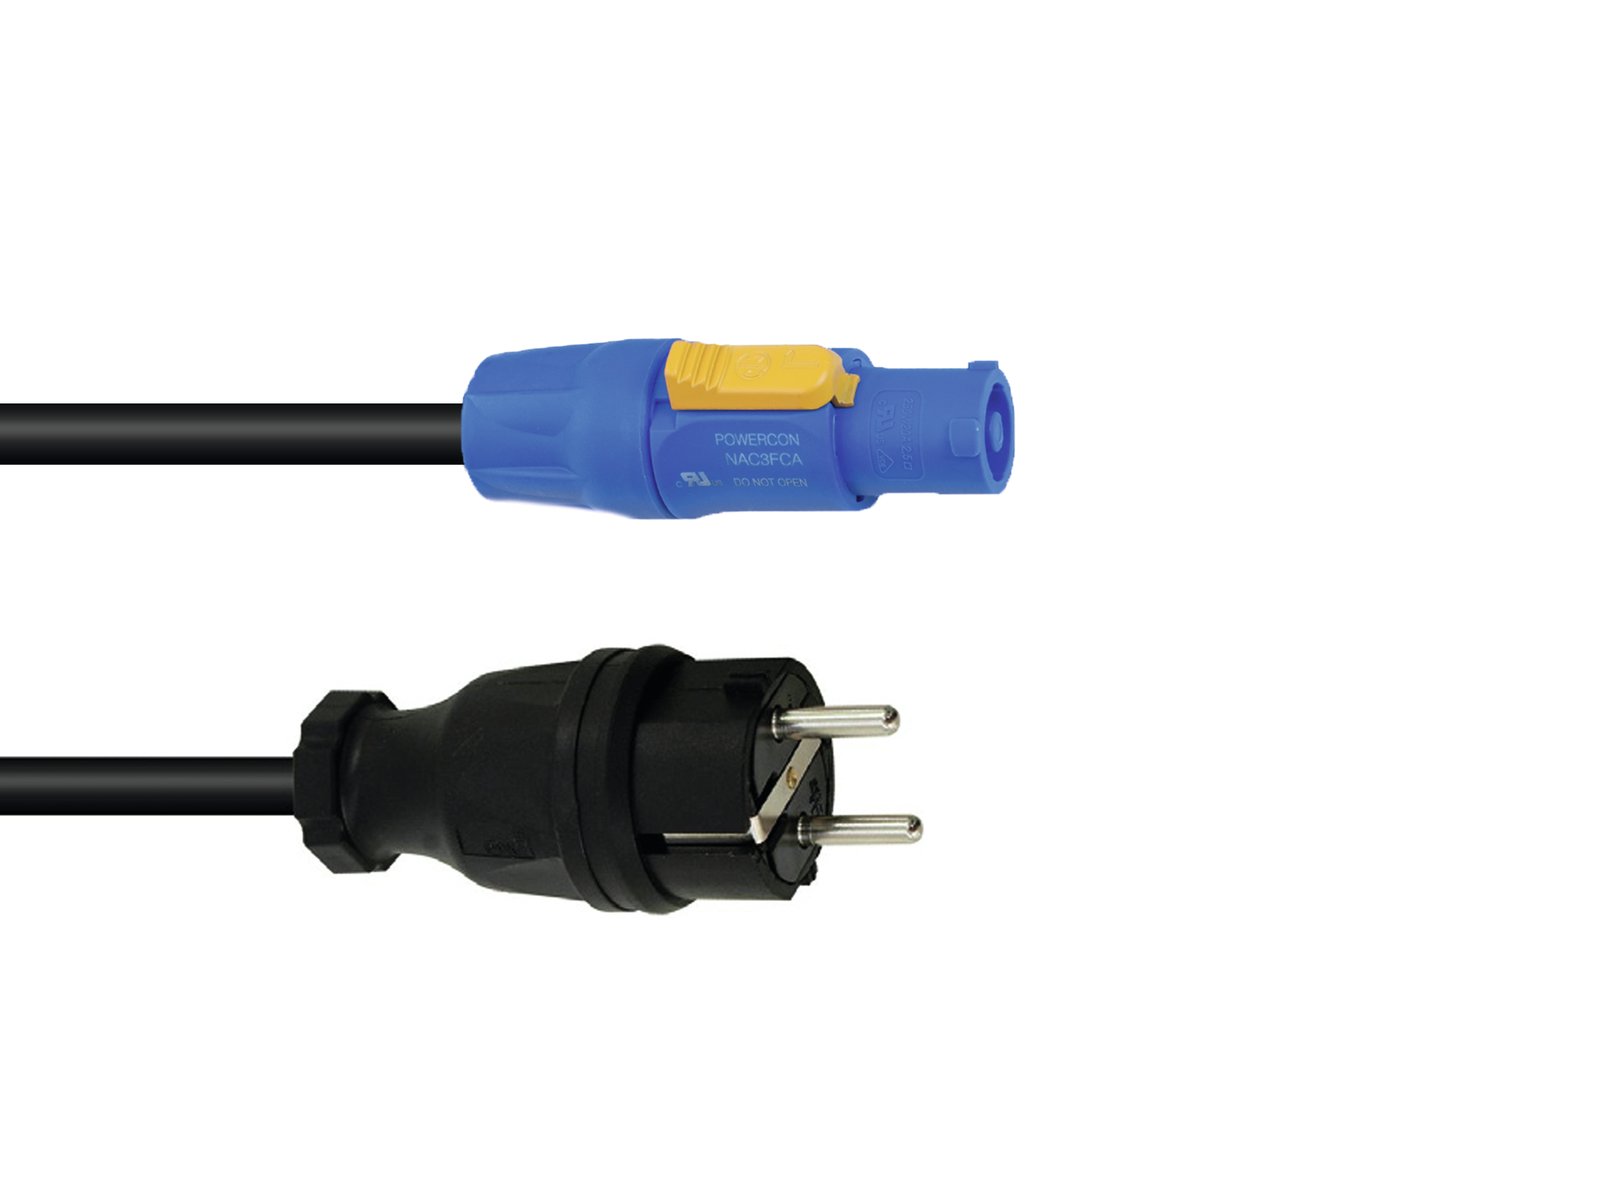 PSSO PowerCon Power Cable 3×2.5 3m H07RN-F